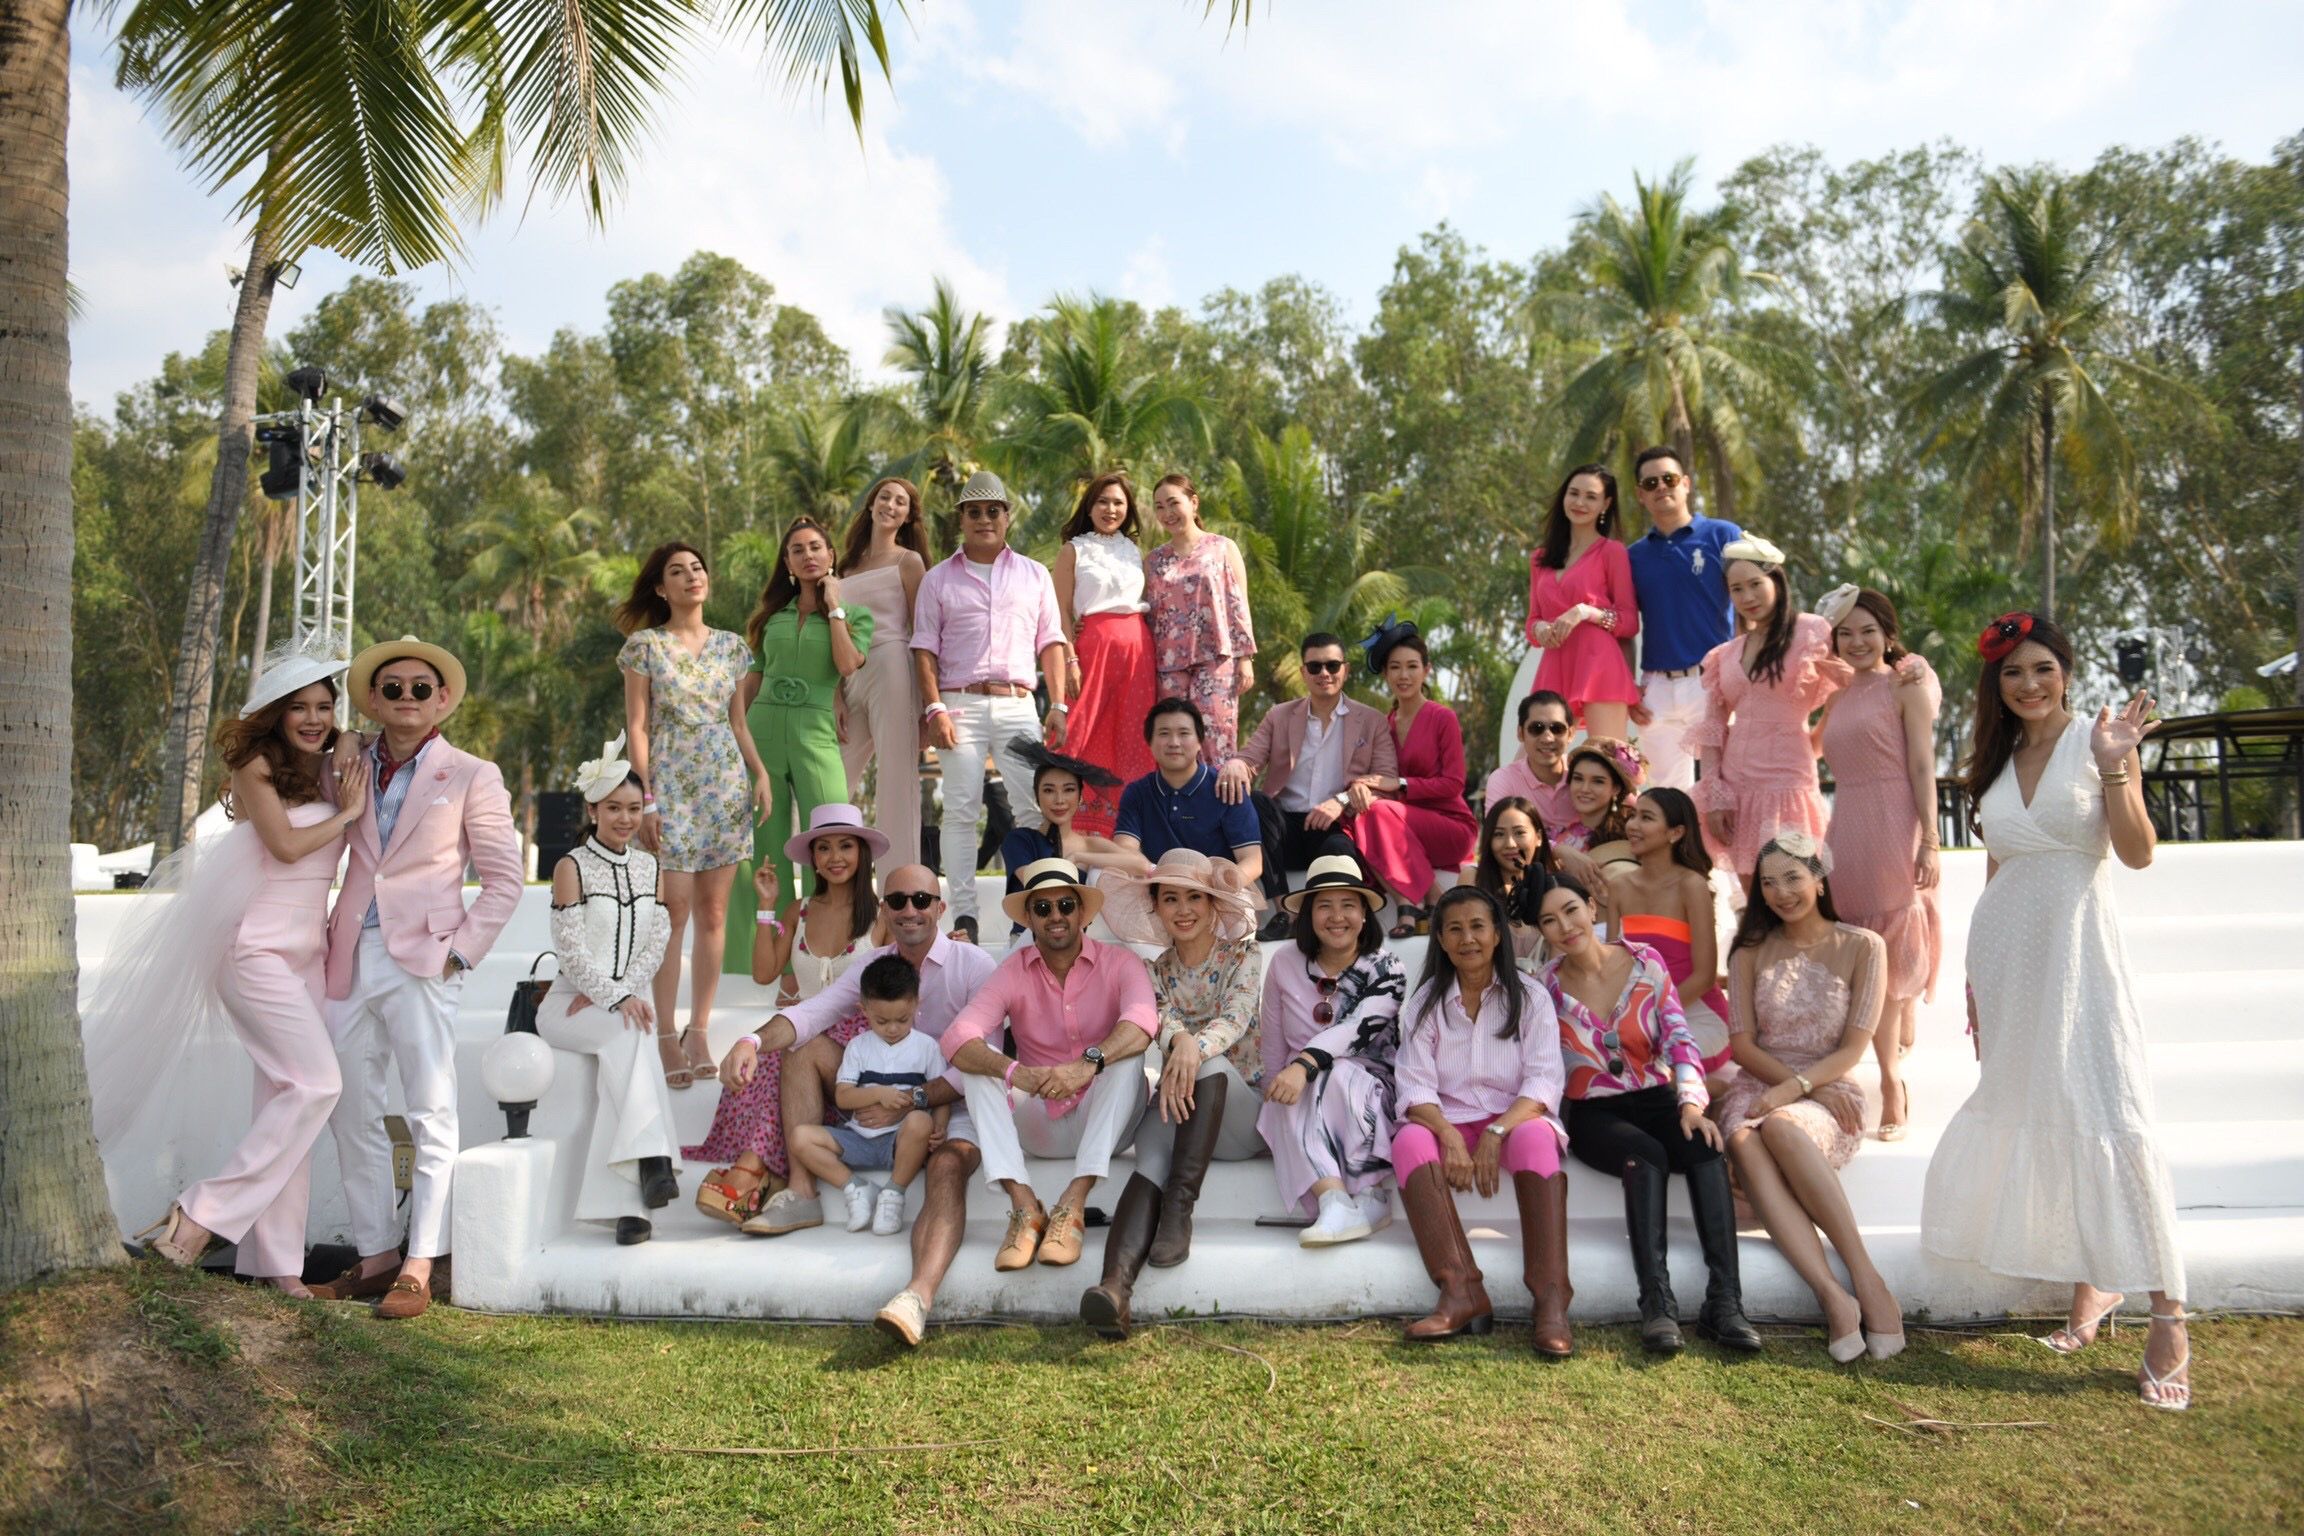 Thai society: Highlights from Thailand’s Queen’s Cup Pink Polo 2020